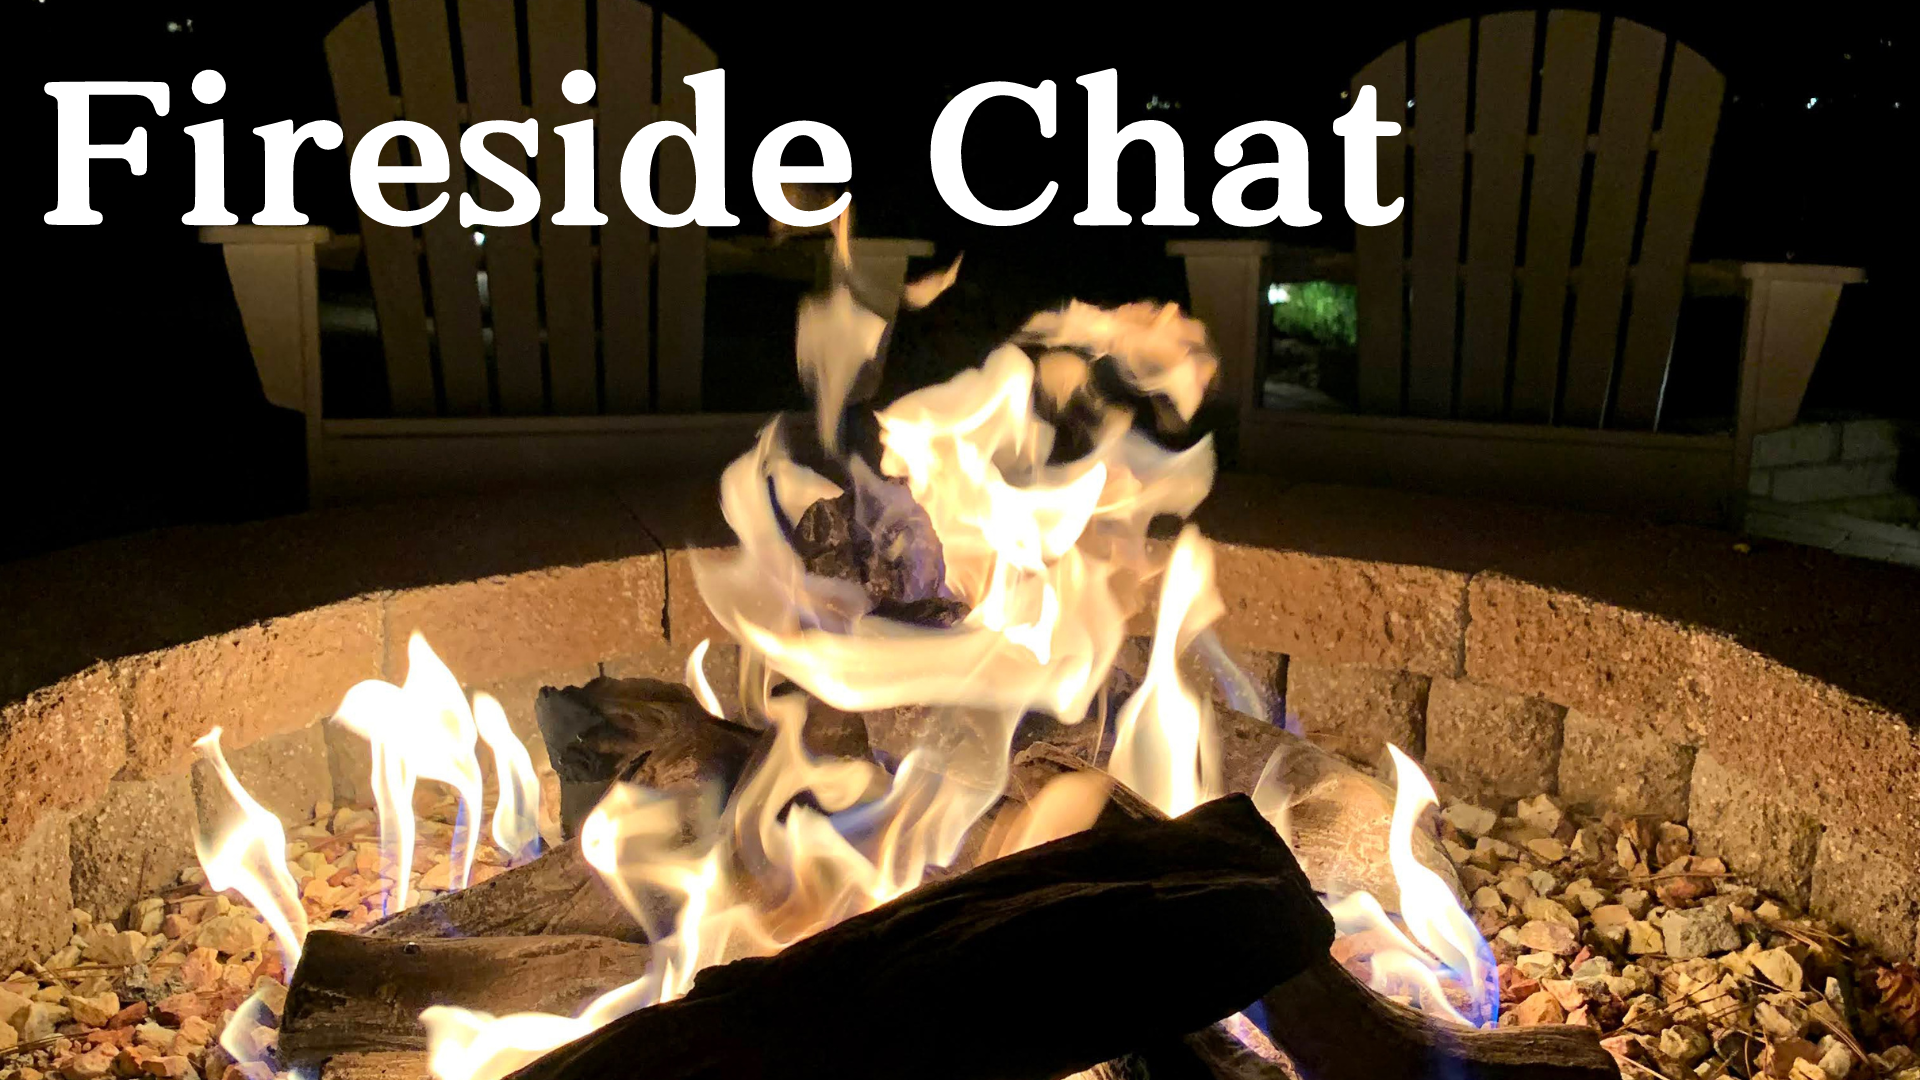 Fireside Chat image